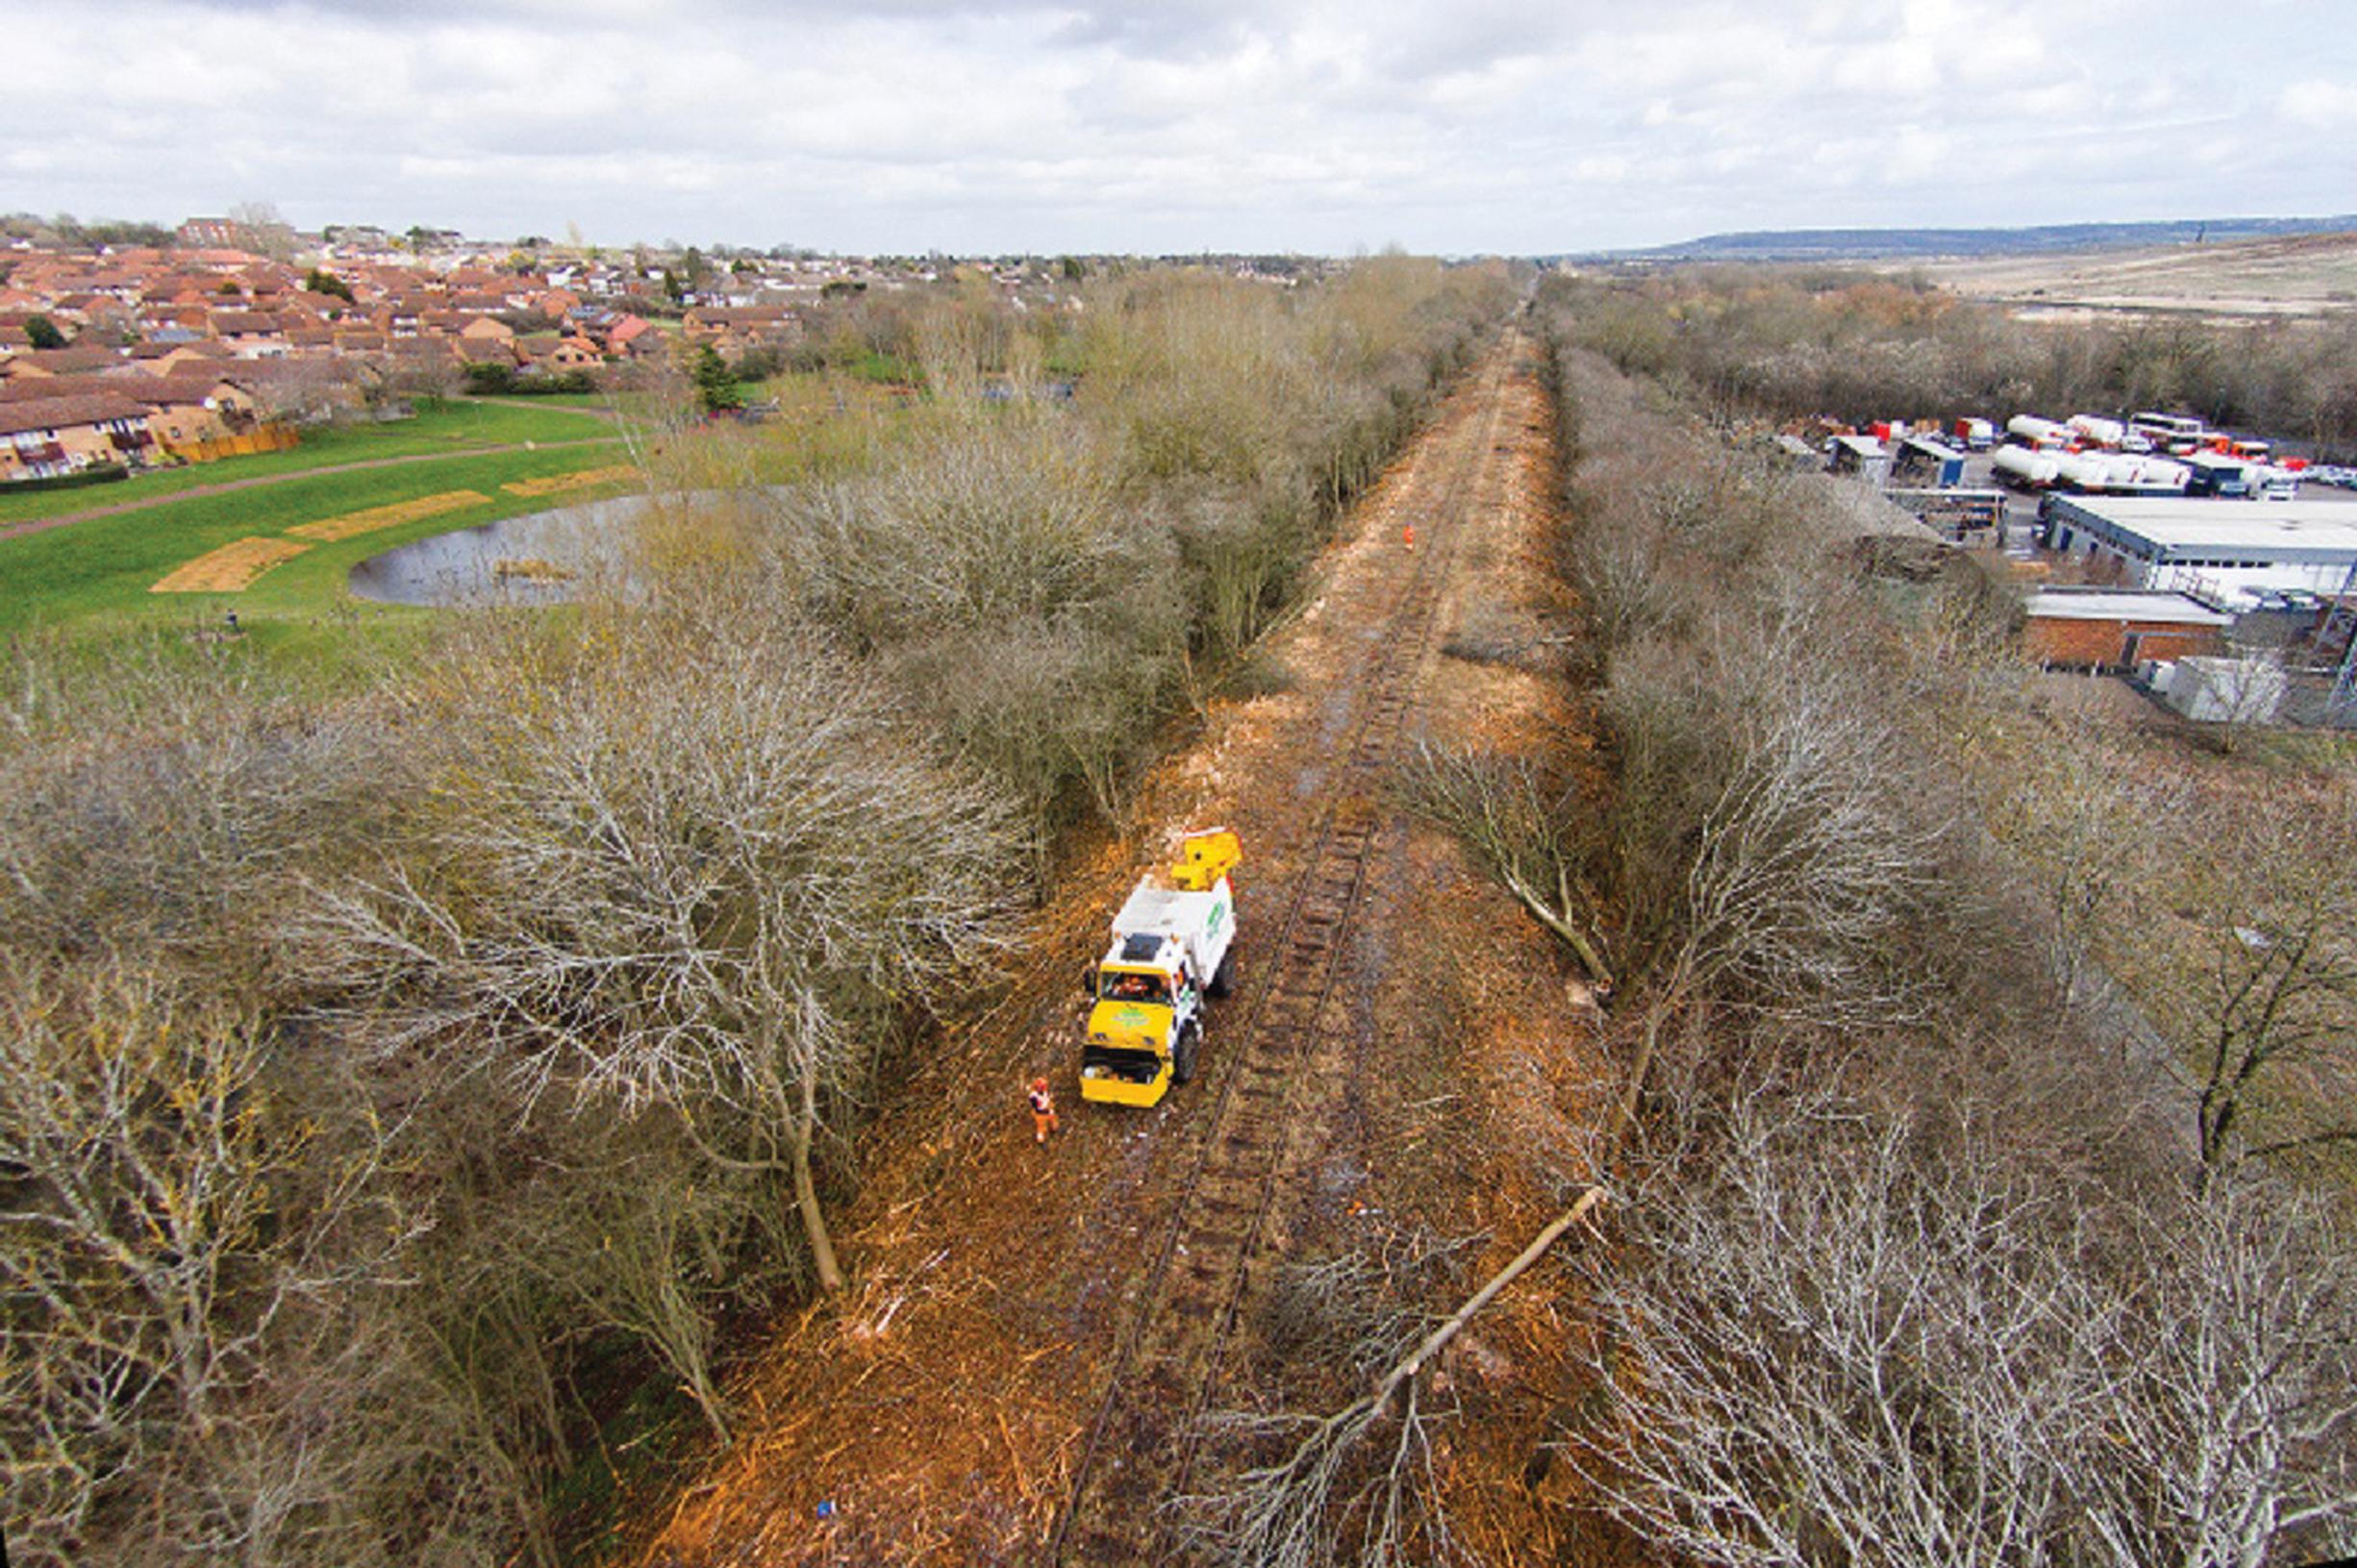 The disused alignment of the East-West Rail line near Winslow, Buckinghamshire